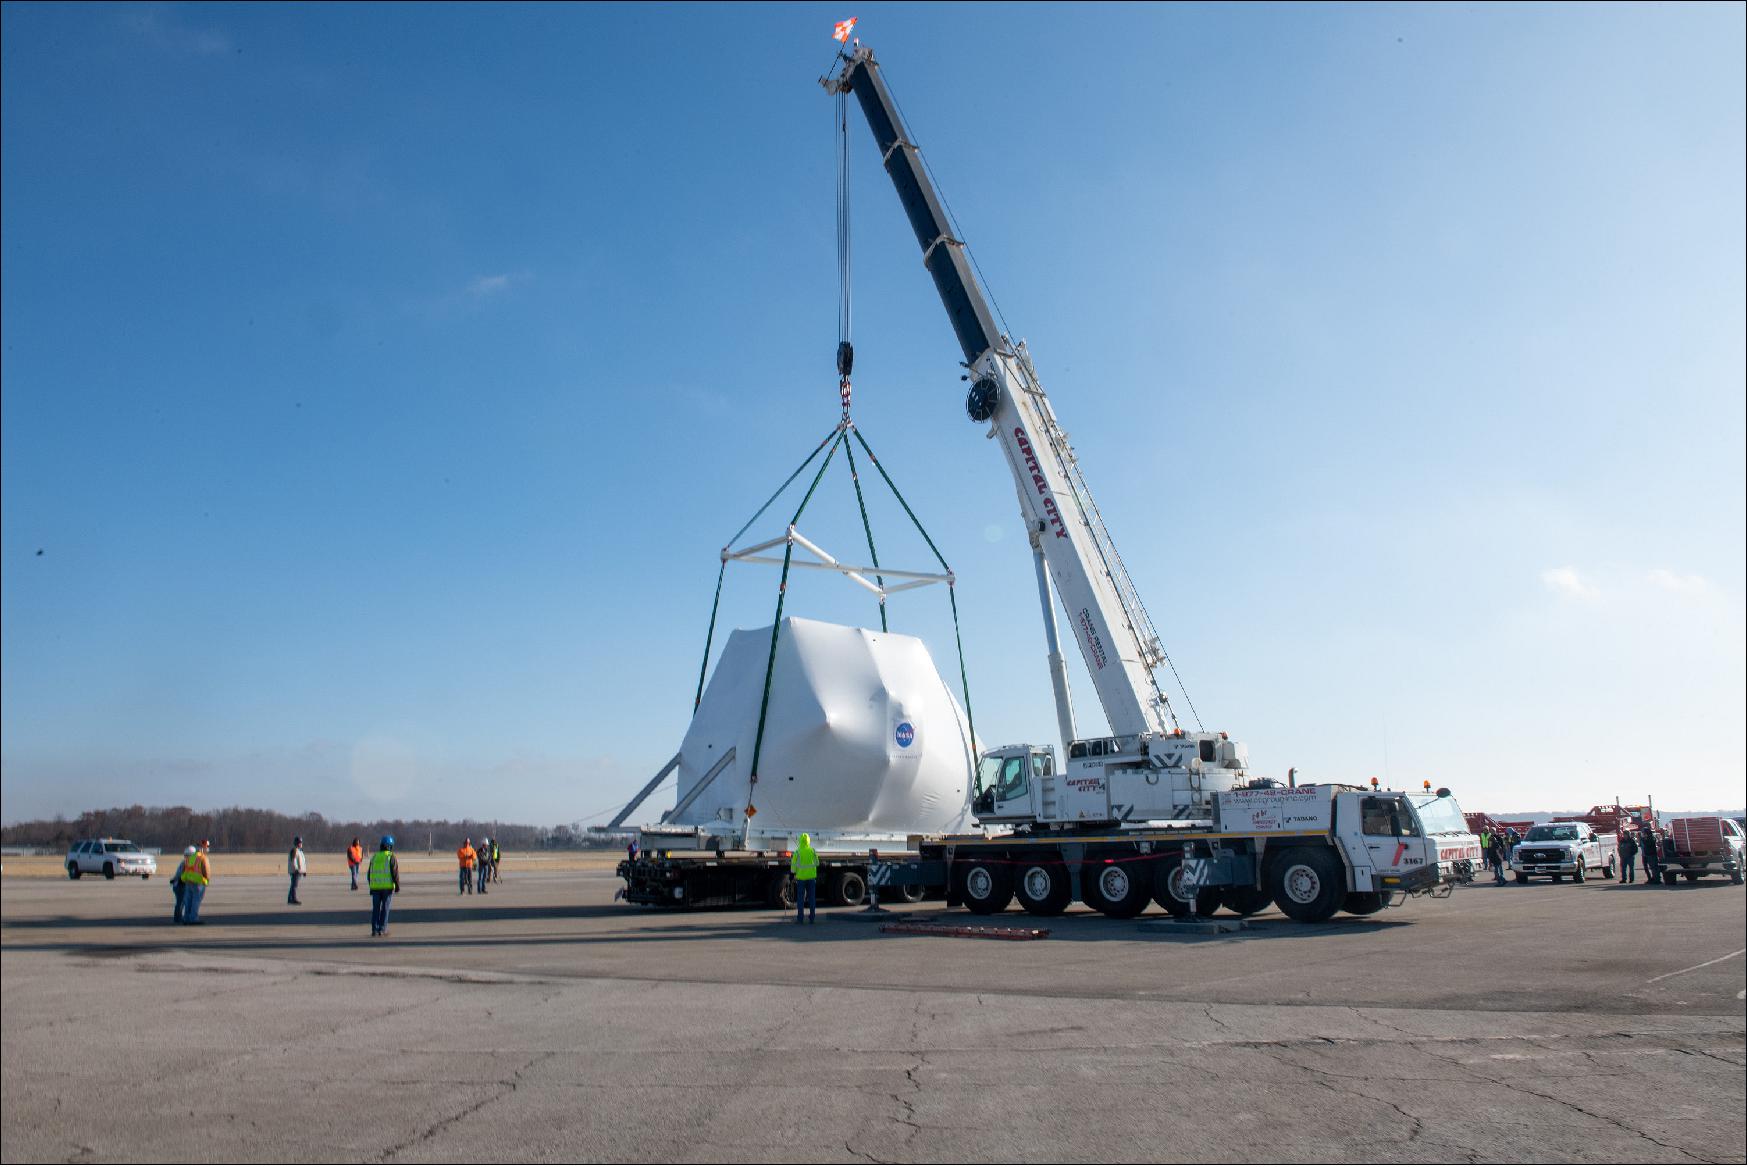 Figure 51: The Orion spacecraft being lifted onto the truck for transport to NASA's Plum Brook Station (image credit: NASA)